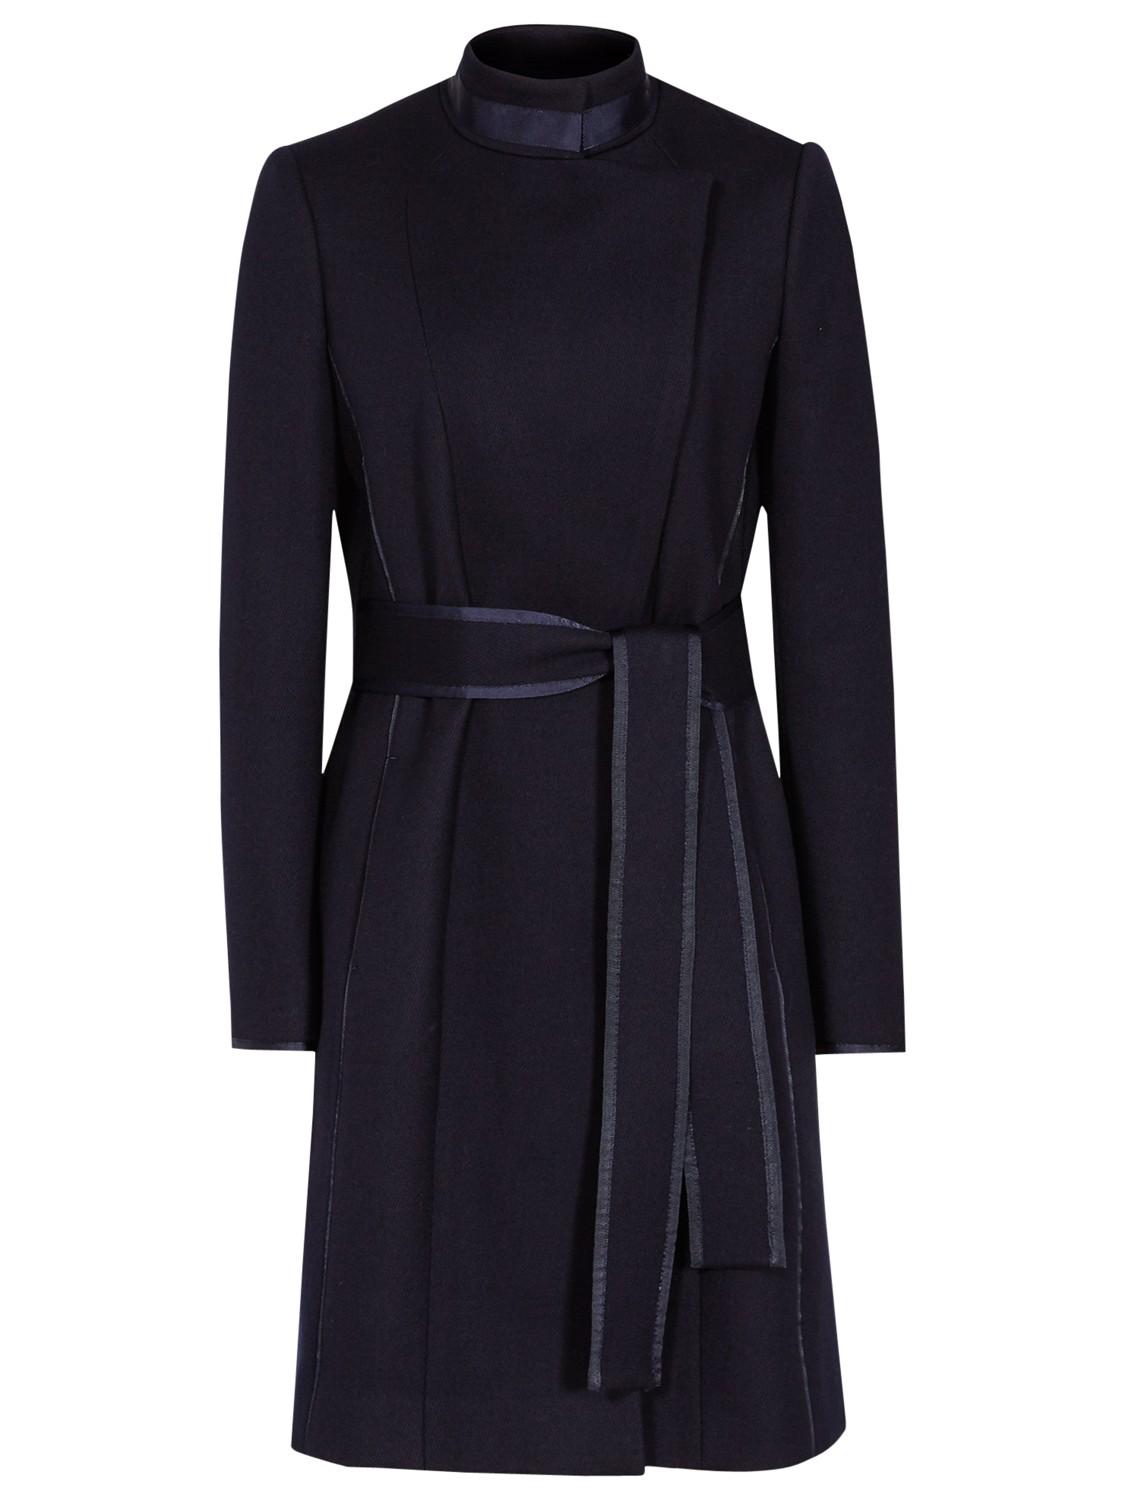 Reiss Lucille Coat in Navy — UFO No More